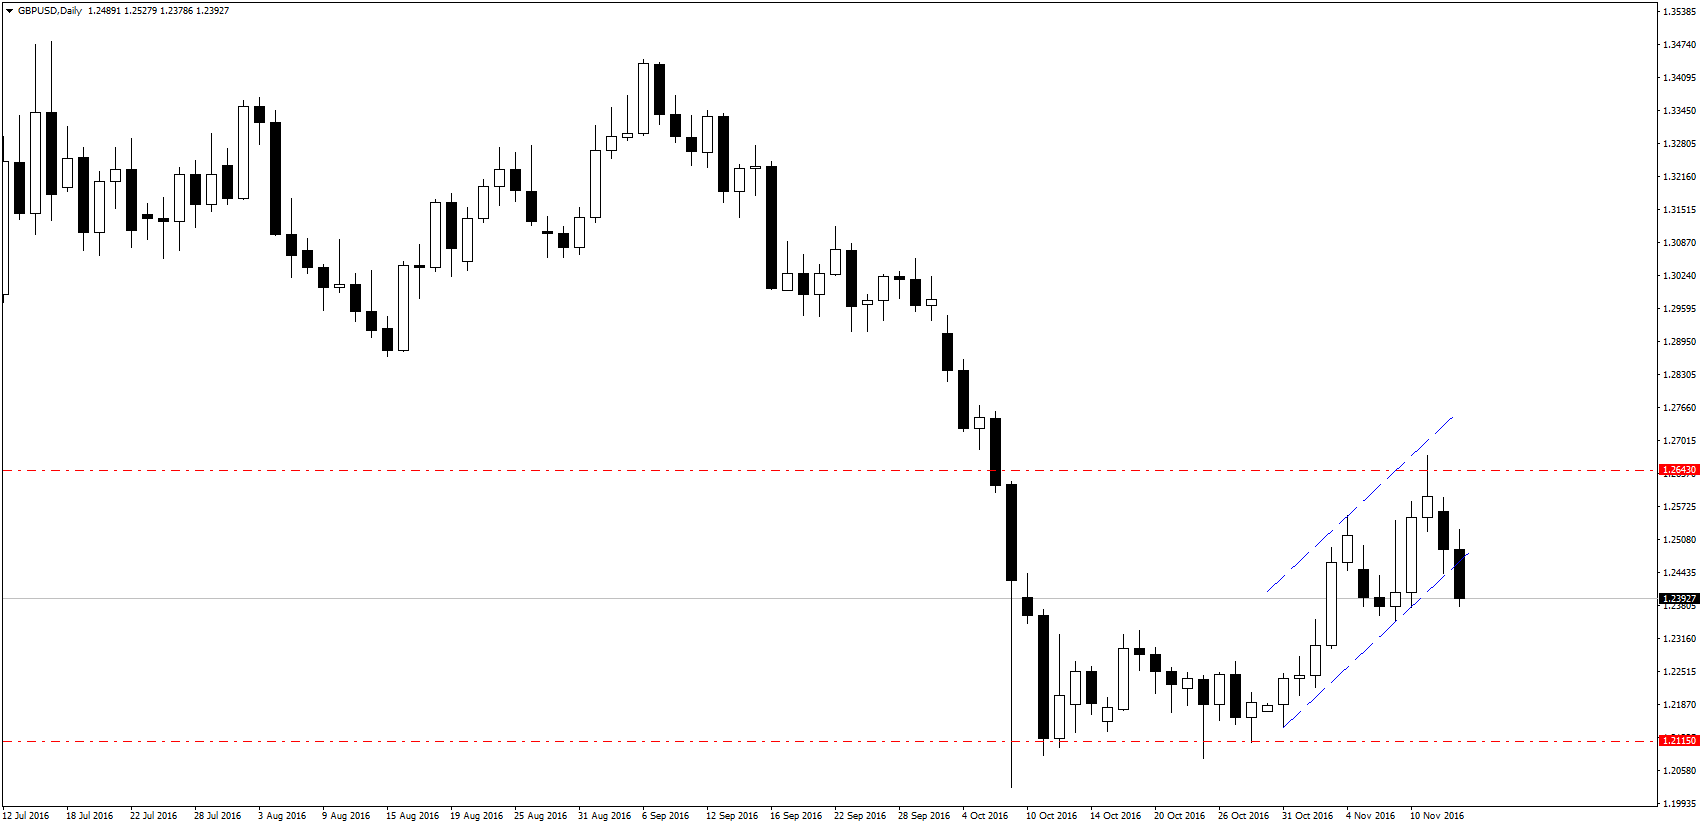 GBP/USD, Daily chart